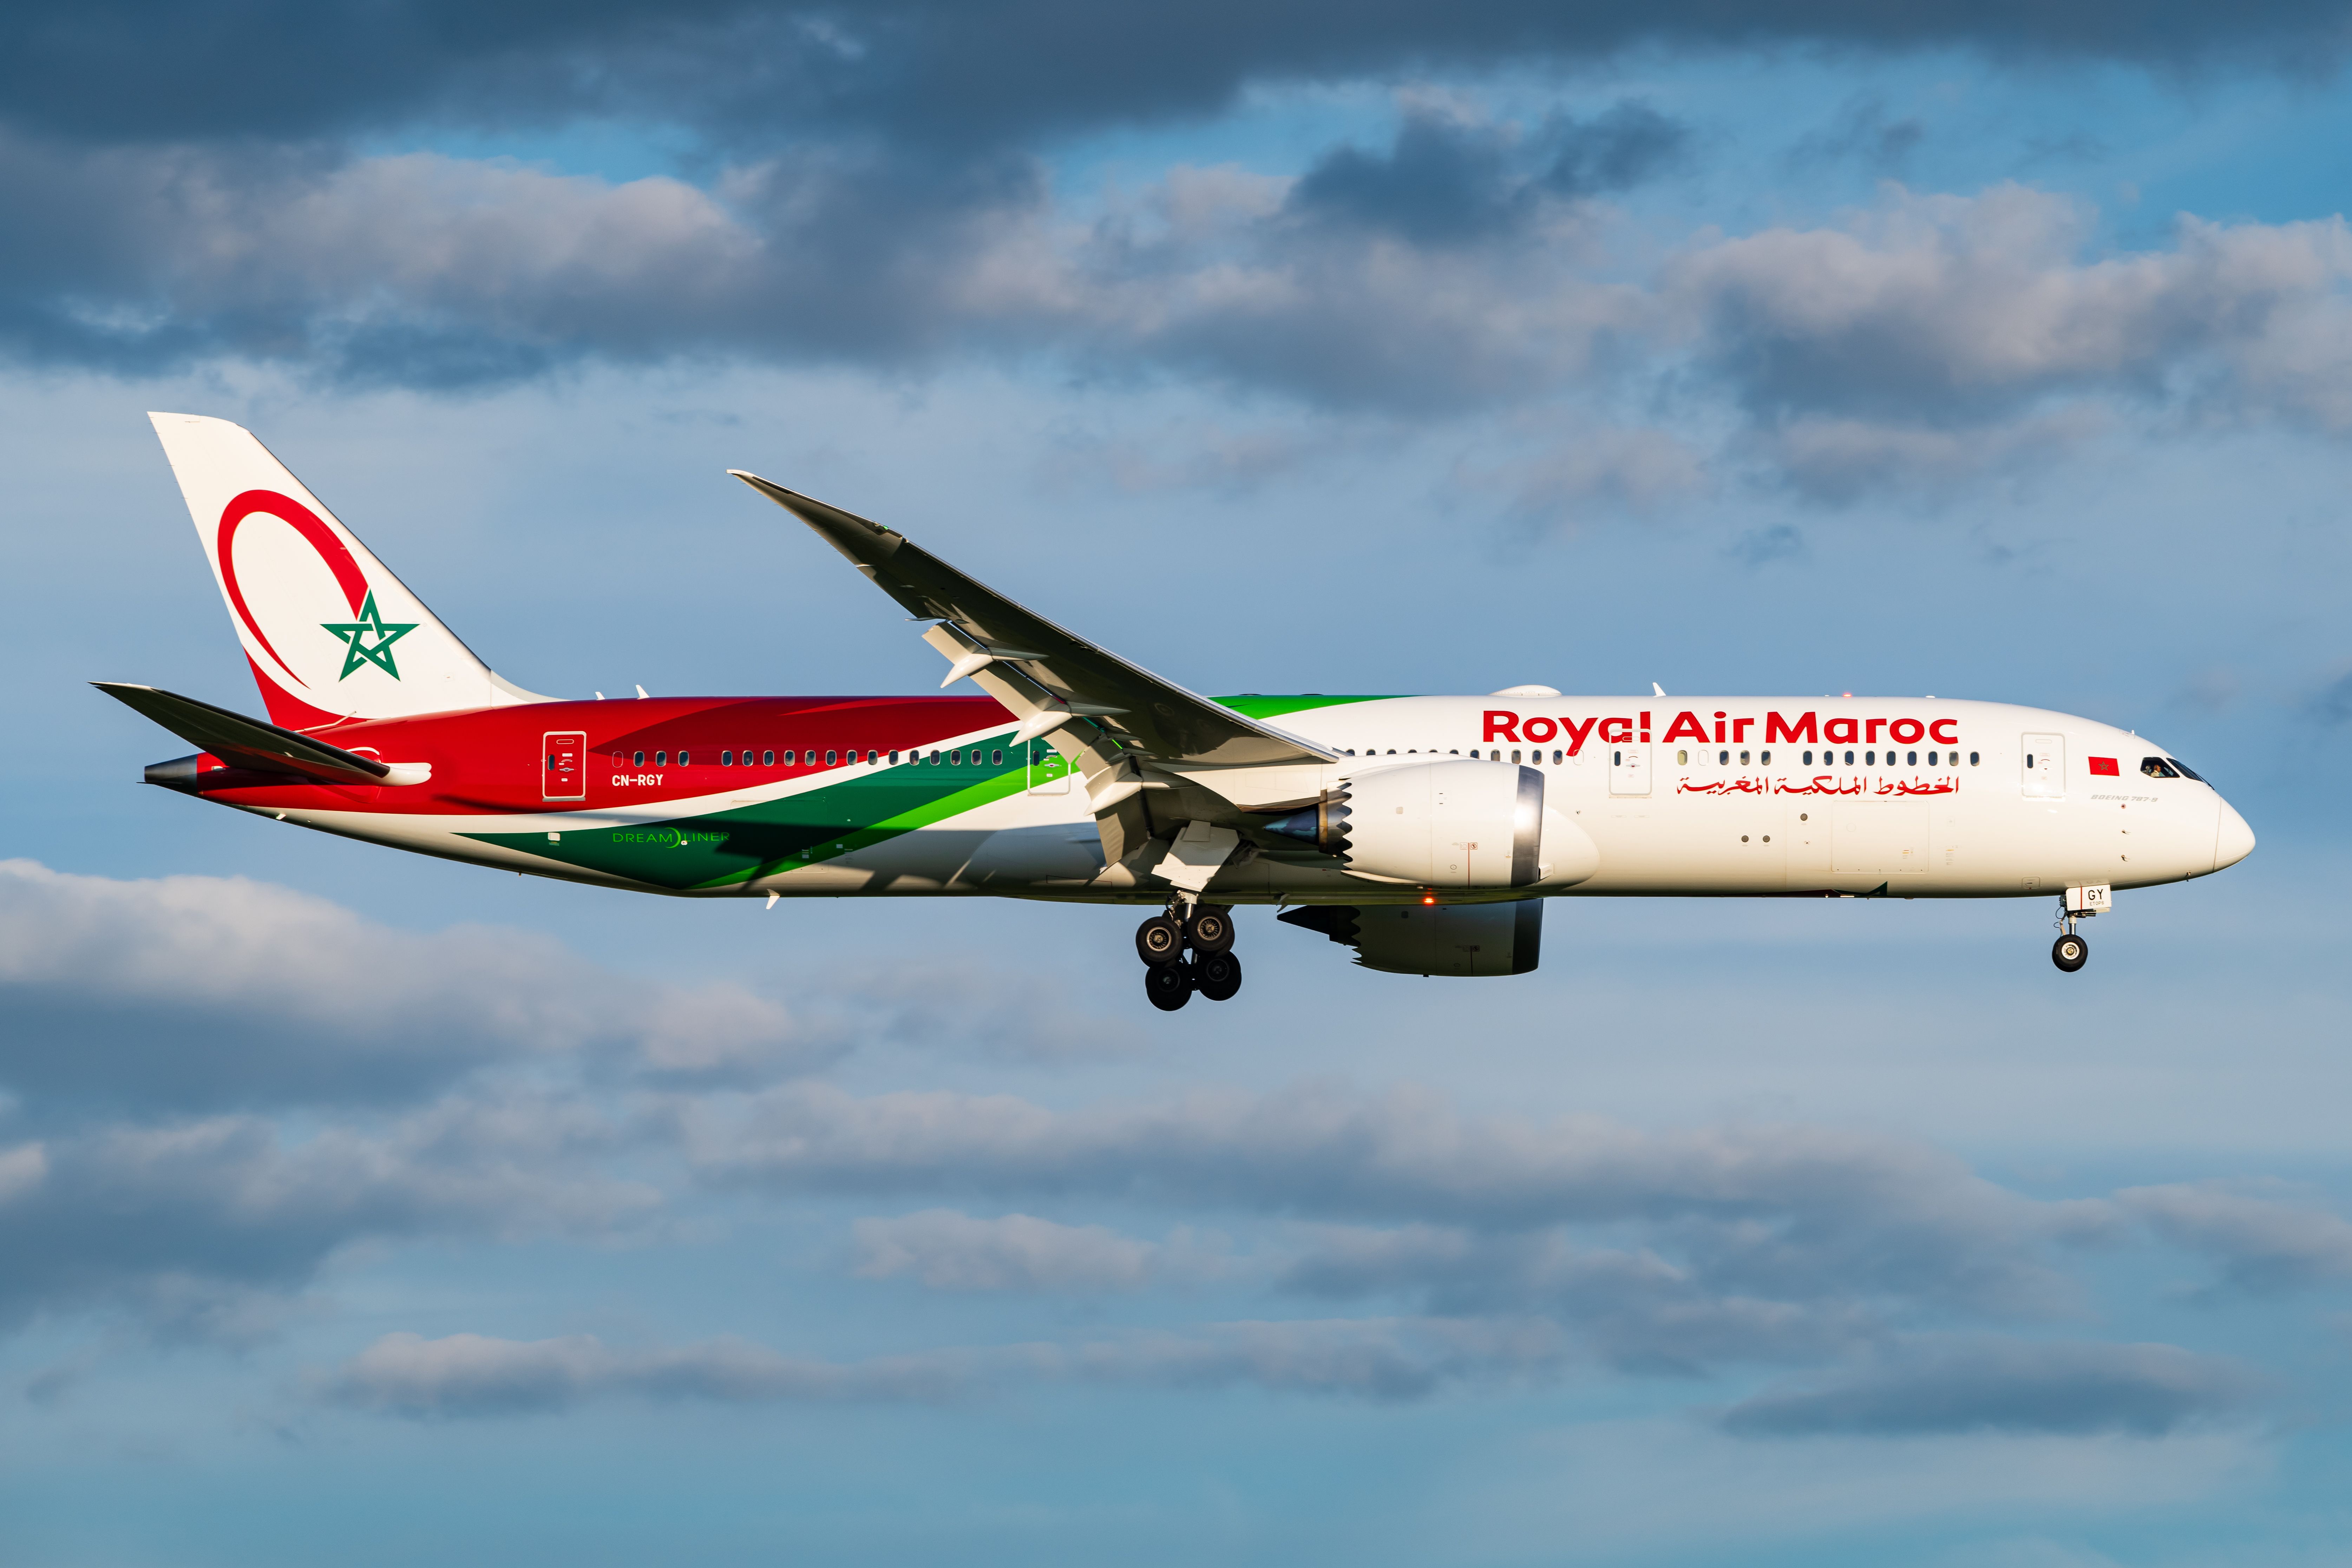 Royal Air Maroc Is Now Letting Passengers Resell Flight Tickets